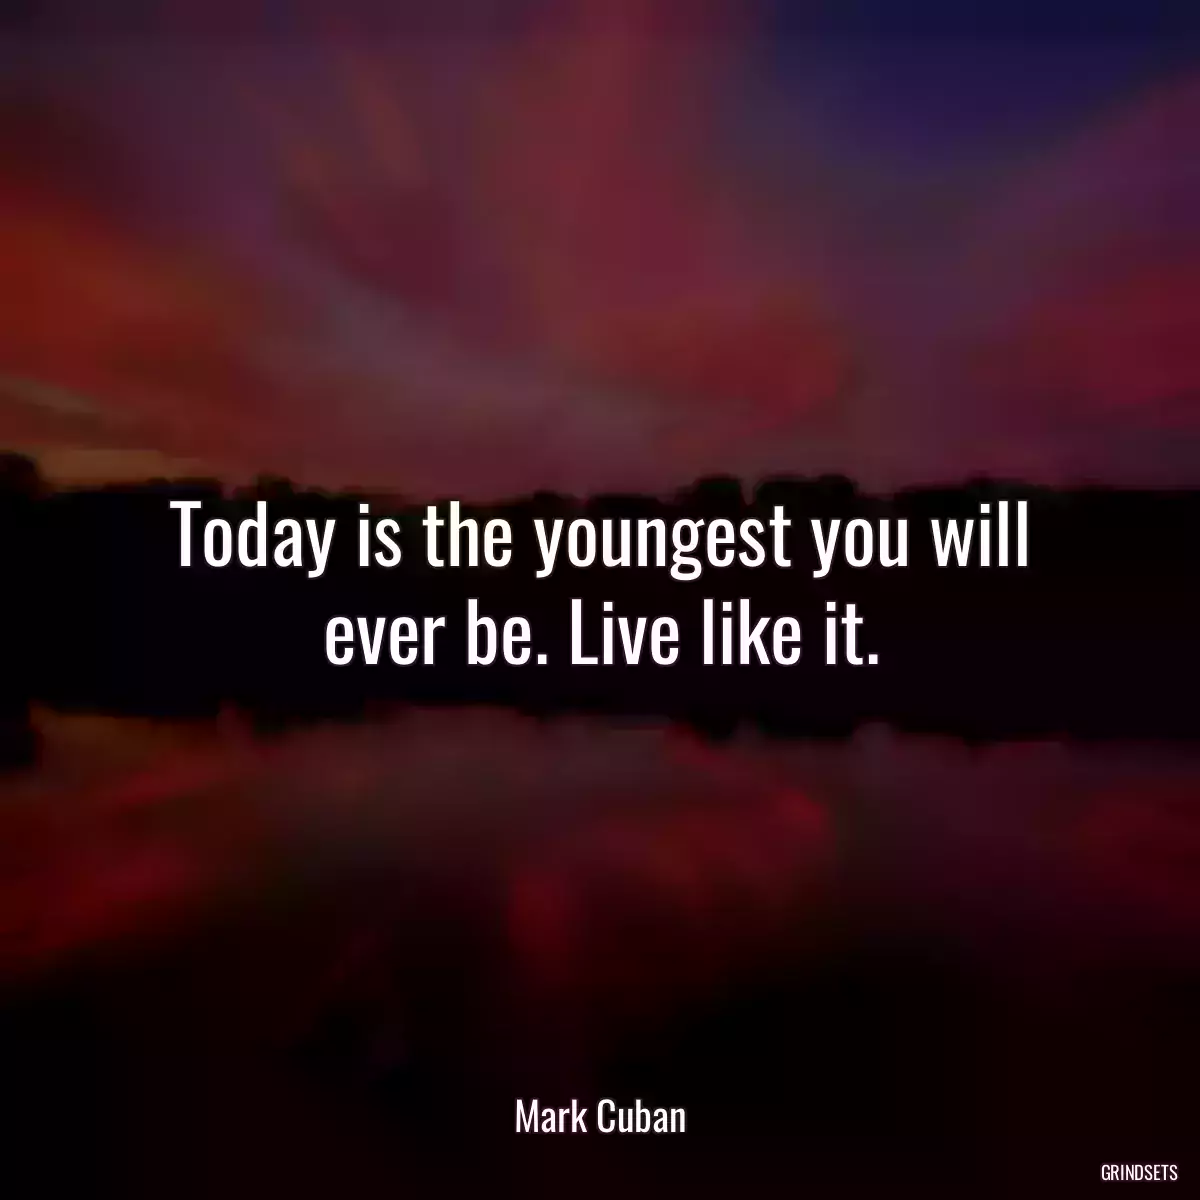 Today is the youngest you will ever be. Live like it.